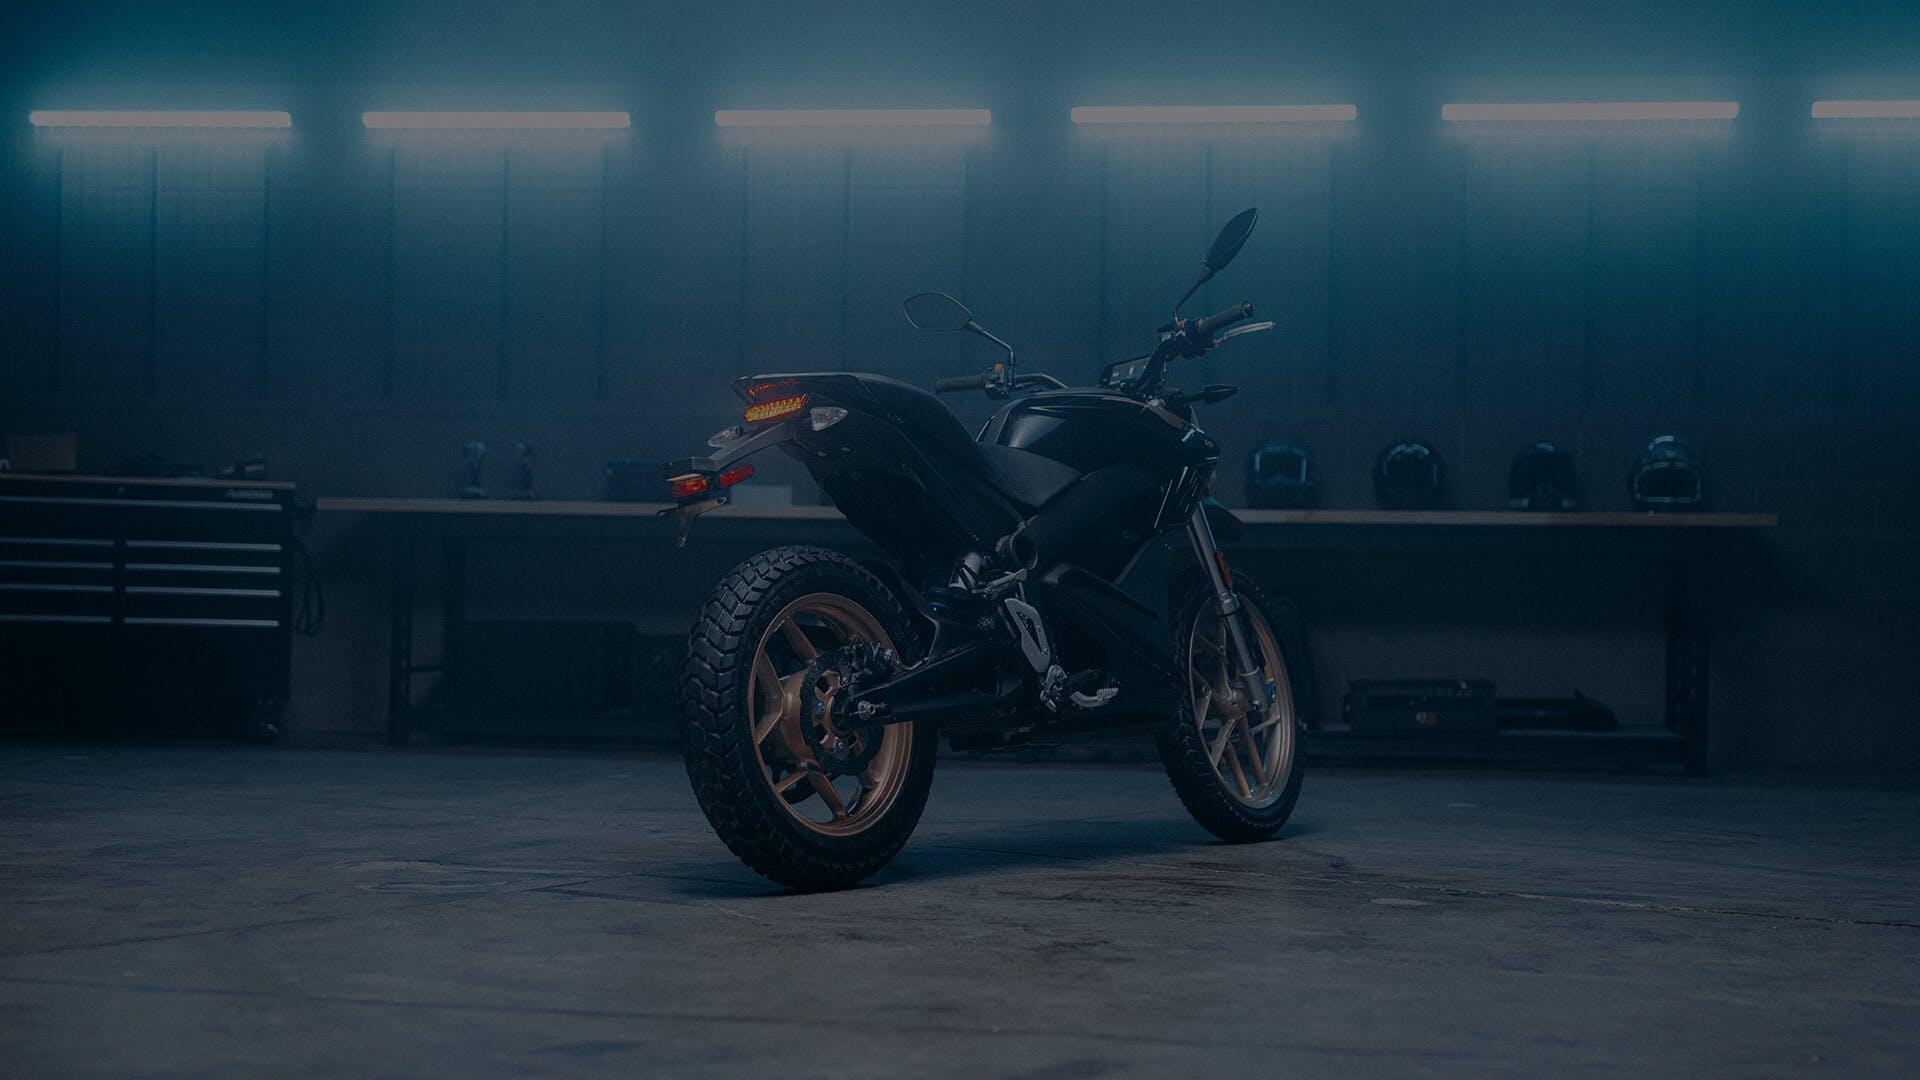 https://e-vehicleinfo.com/global/zero-dsr-electric-motorcycle-price-range-and-specifications/